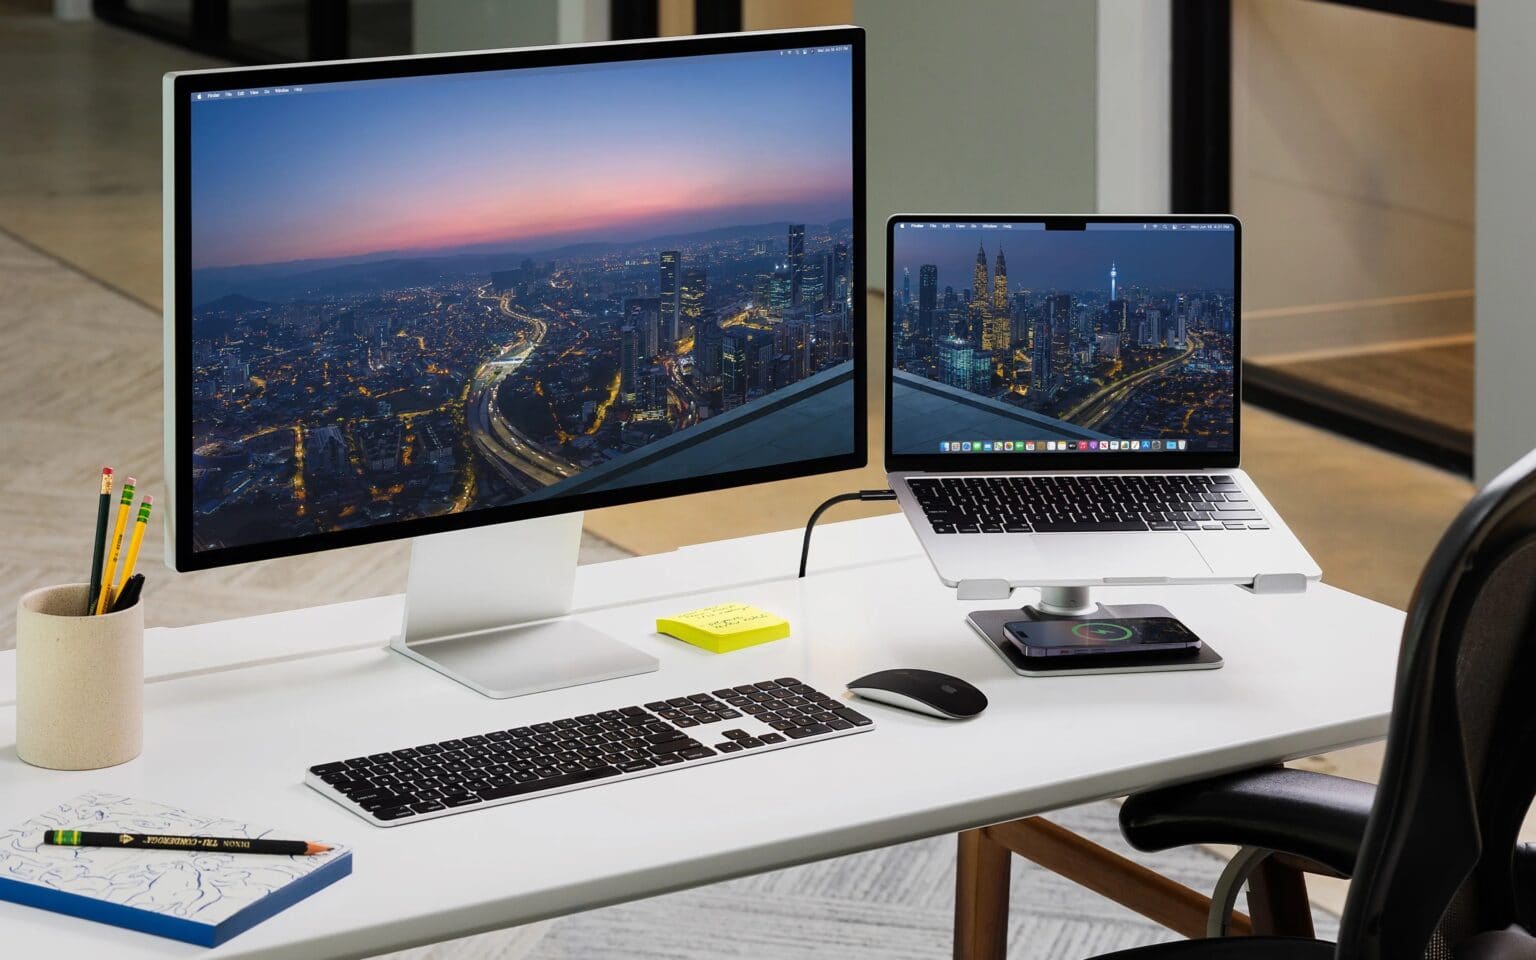 You can adjust the stand's height to bring your MacBook's screen to eye level and align it with your main external monitor.